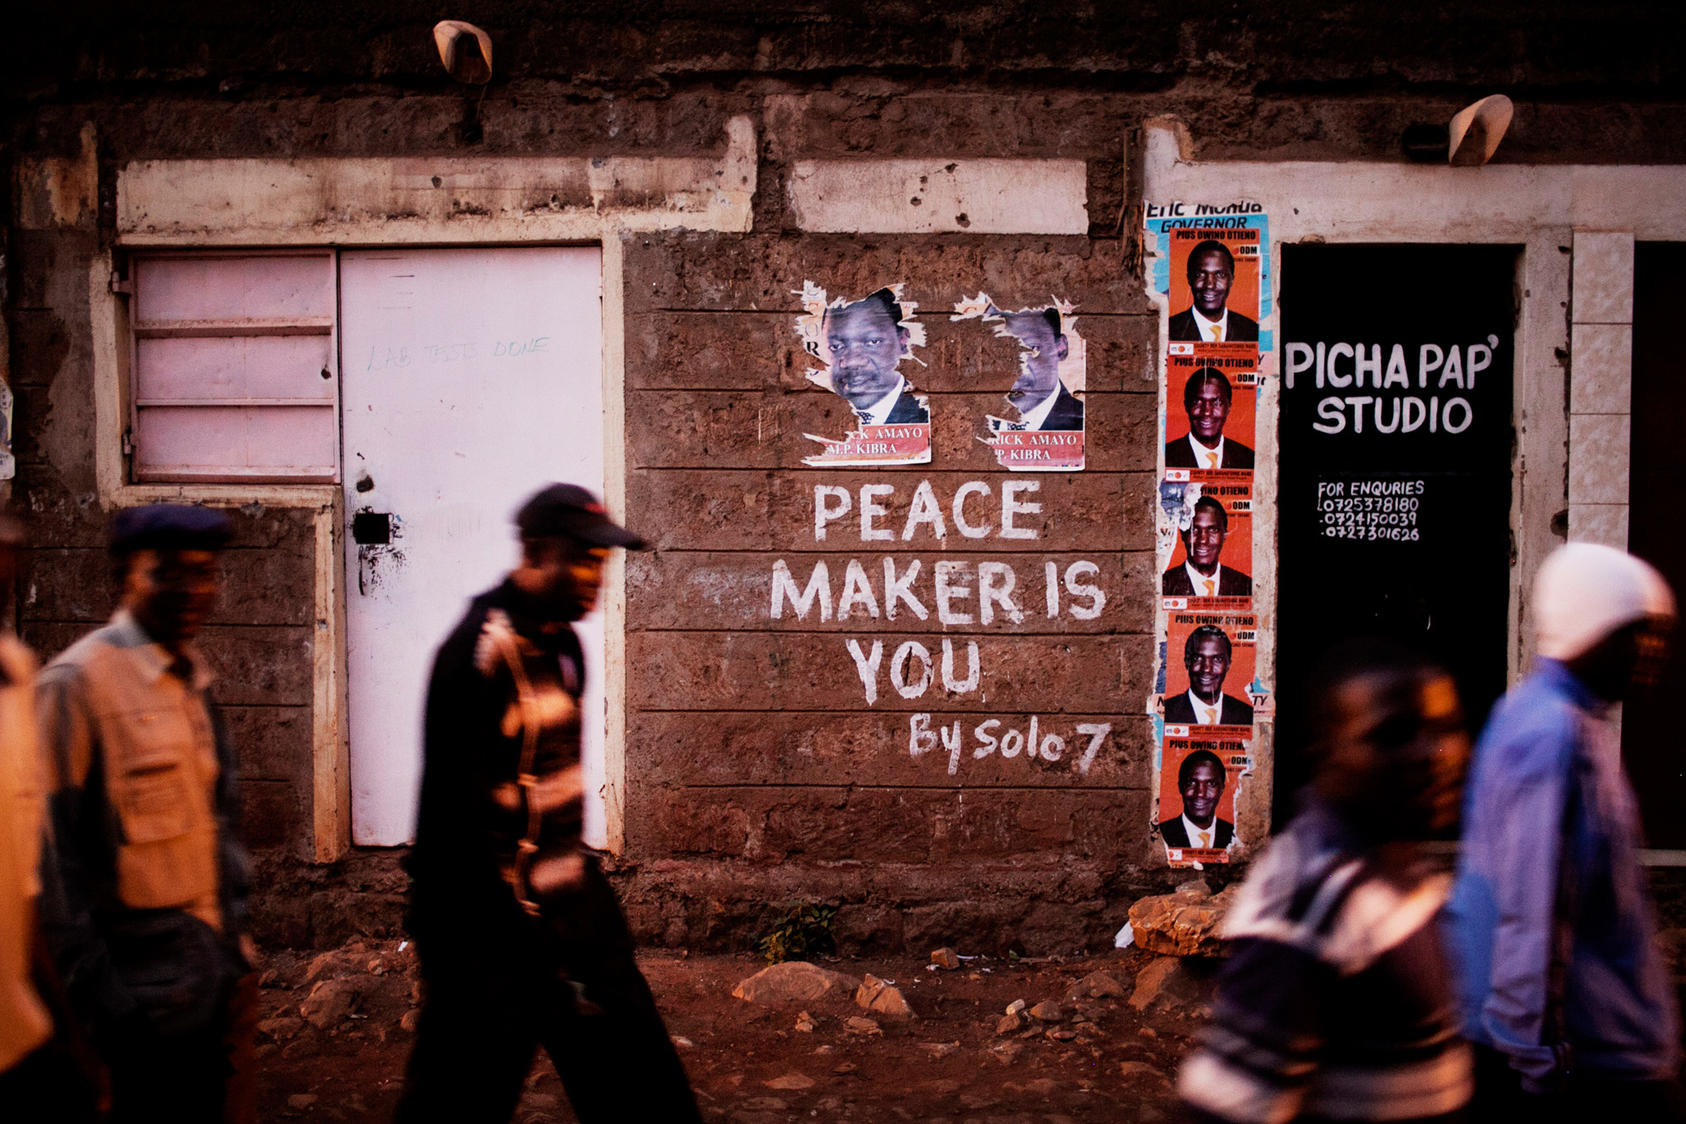 Voters pass a peace message on their way to a polling station in downtown Nairobi, Kenya, March 4, 2013. Millions of Kenyans poured into polling stations across the country Monday in a crucial, anxiously awaited presidential election, and early reports said some violence erupted in the coastal region around Mombasa.